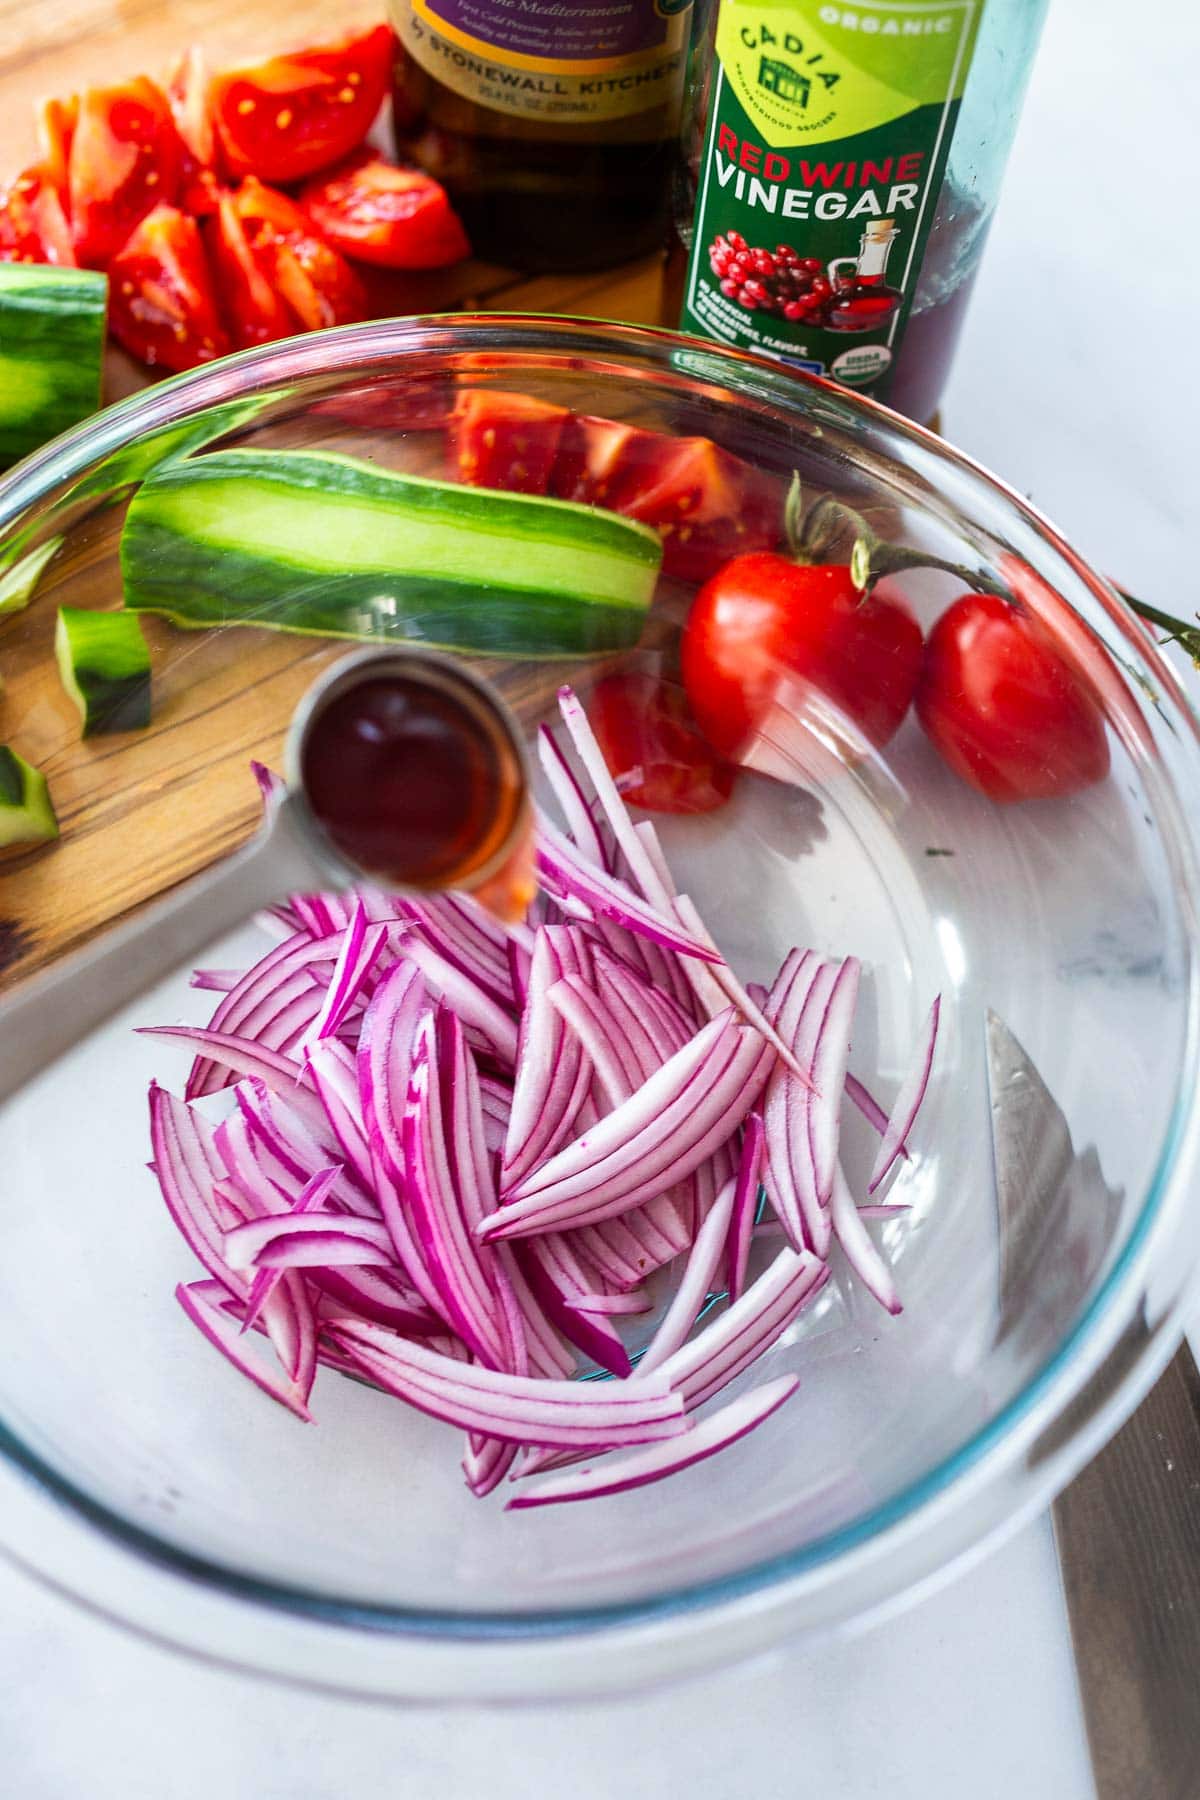 Slivered red onions in a bowl for Cucumber & Tomato Salad.